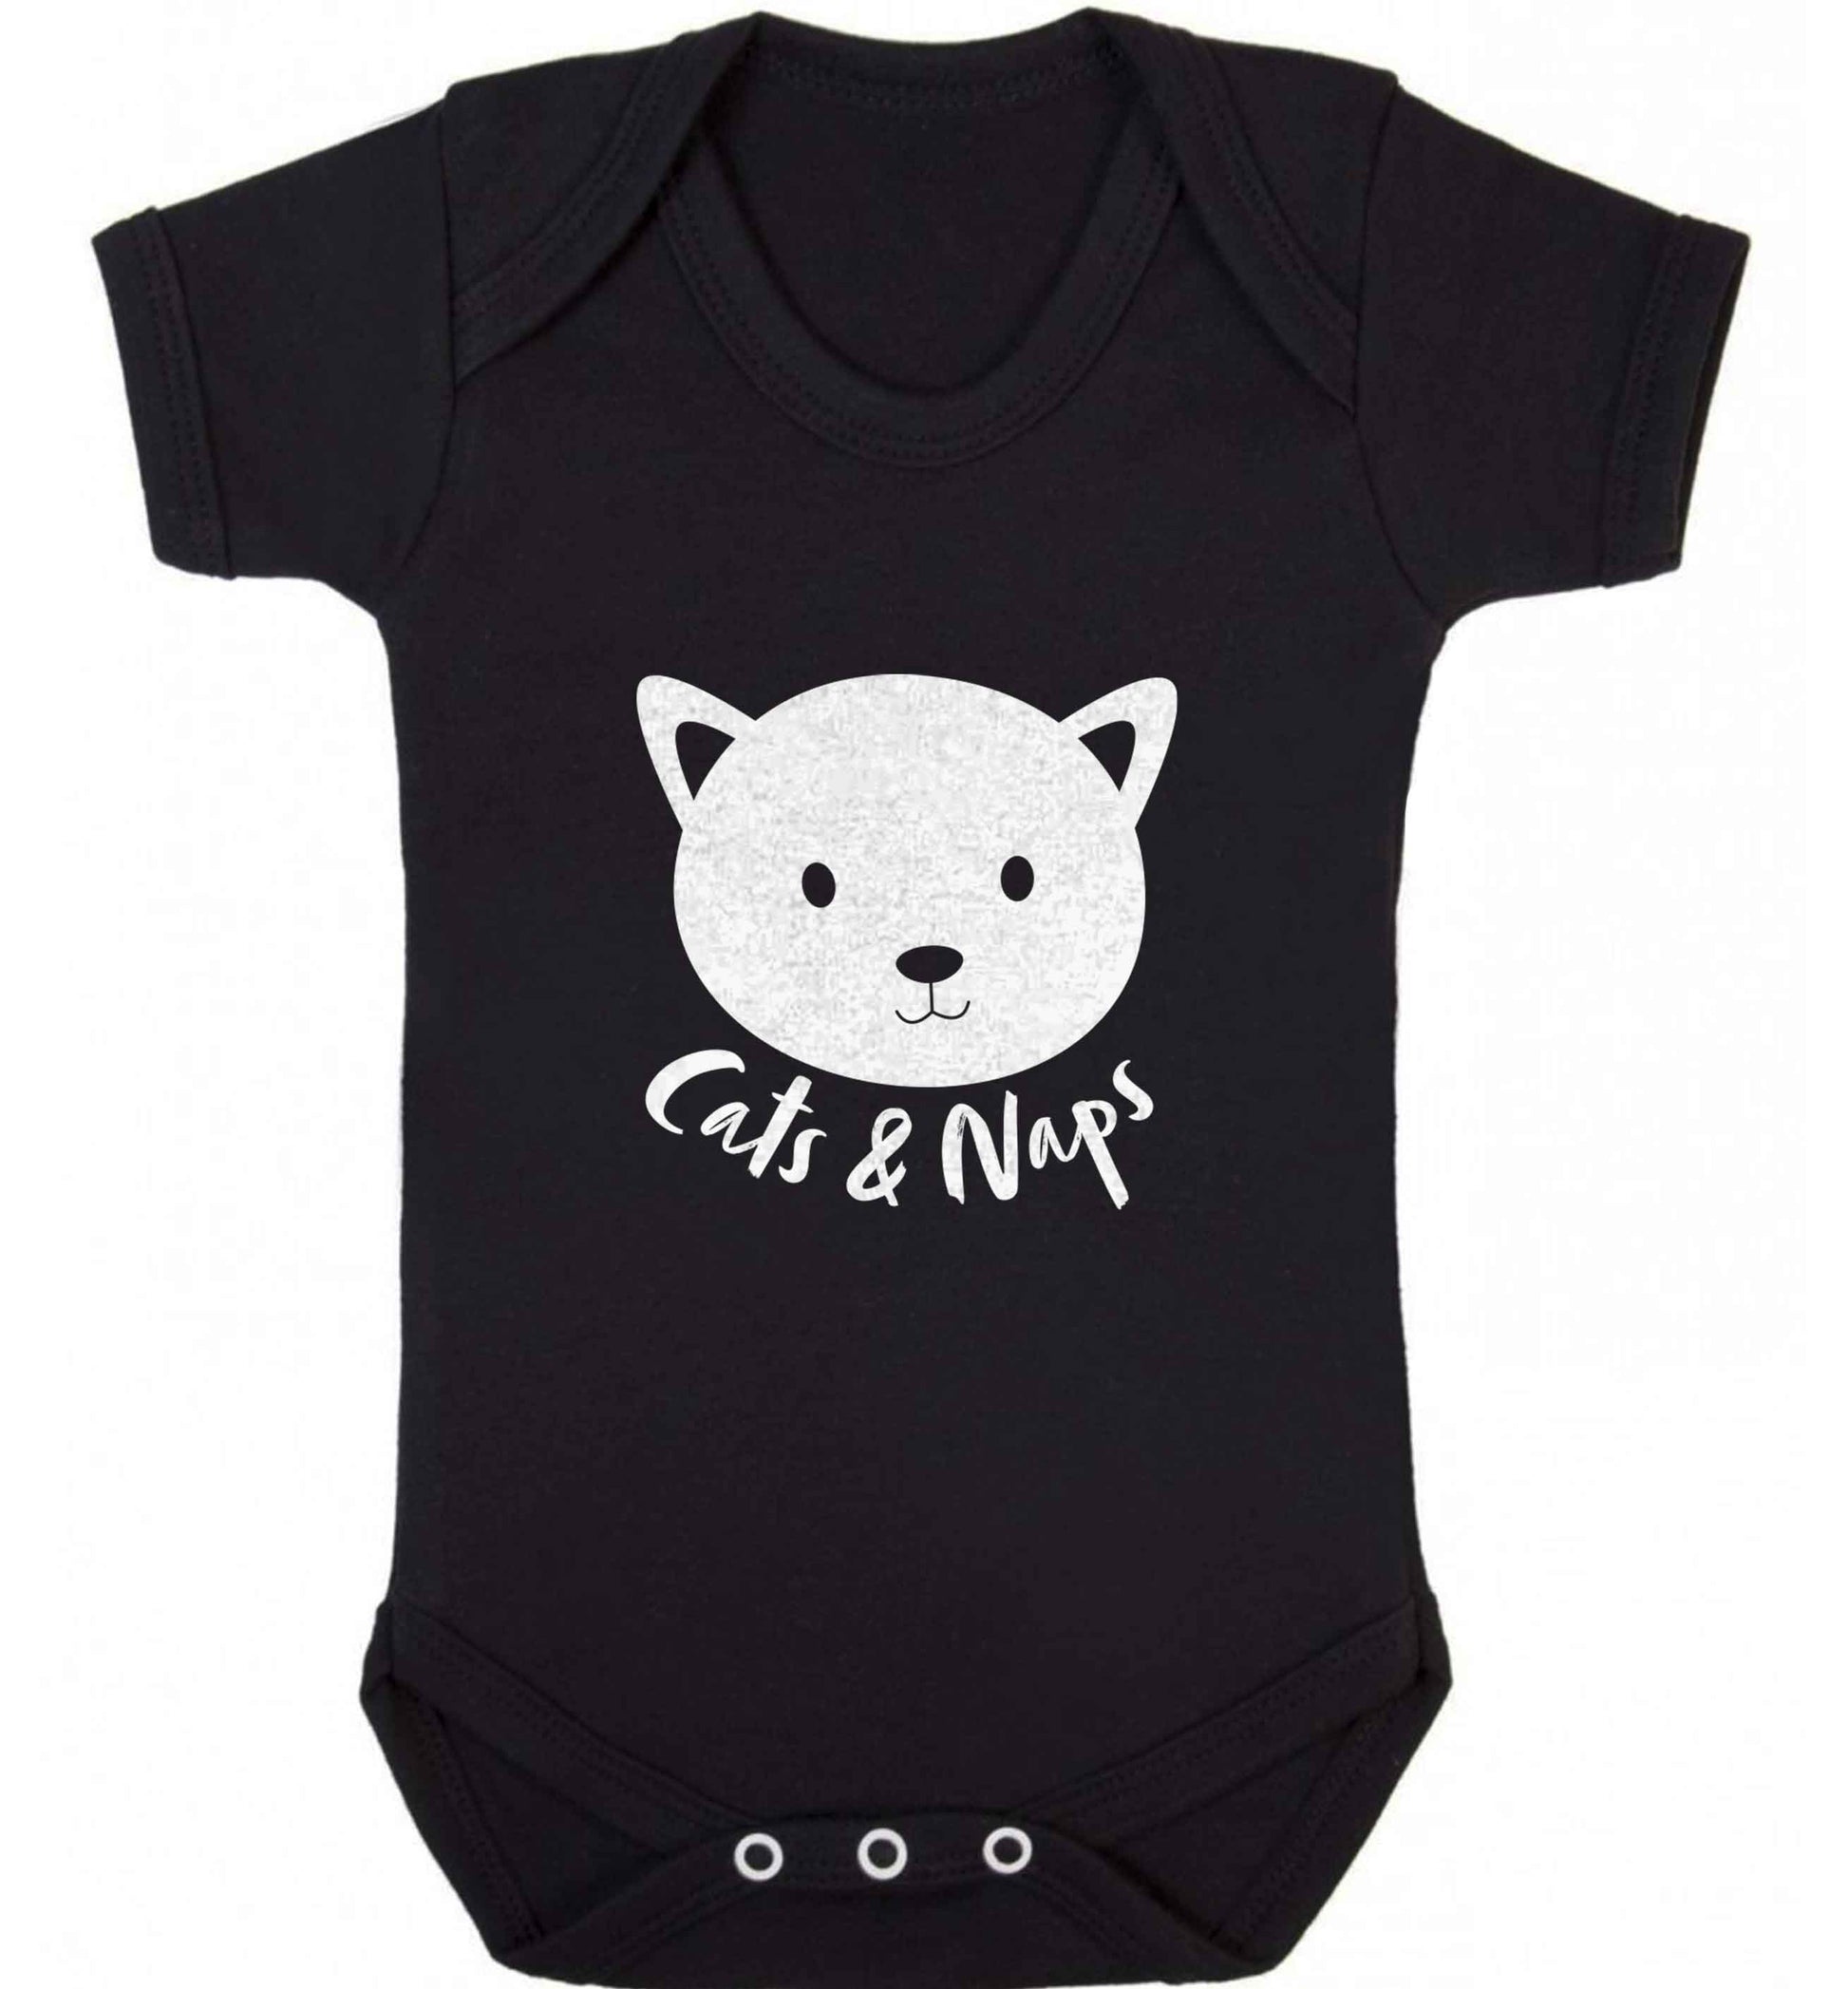 Cats and naps Kit baby vest black 18-24 months